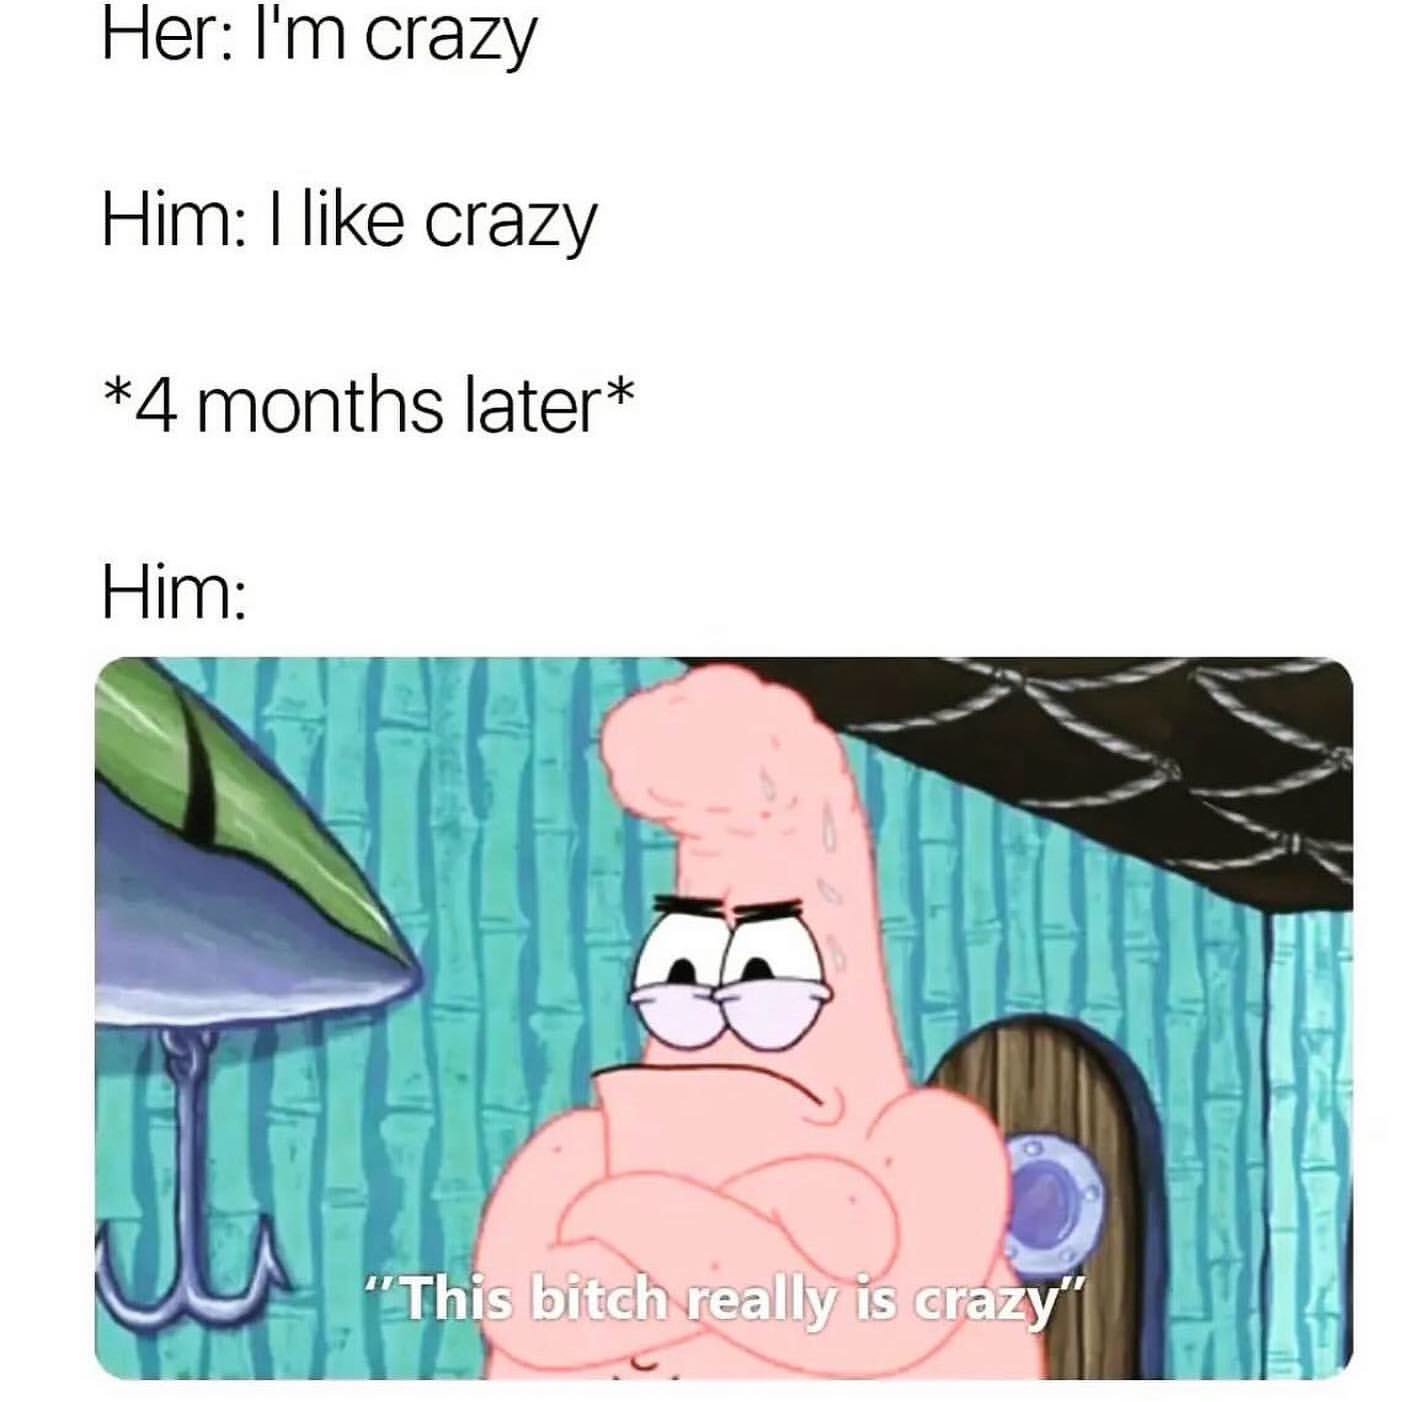 Her: crazy.  Him: I like crazy.  *4 months later*.  Him: This bitch really is crazy.